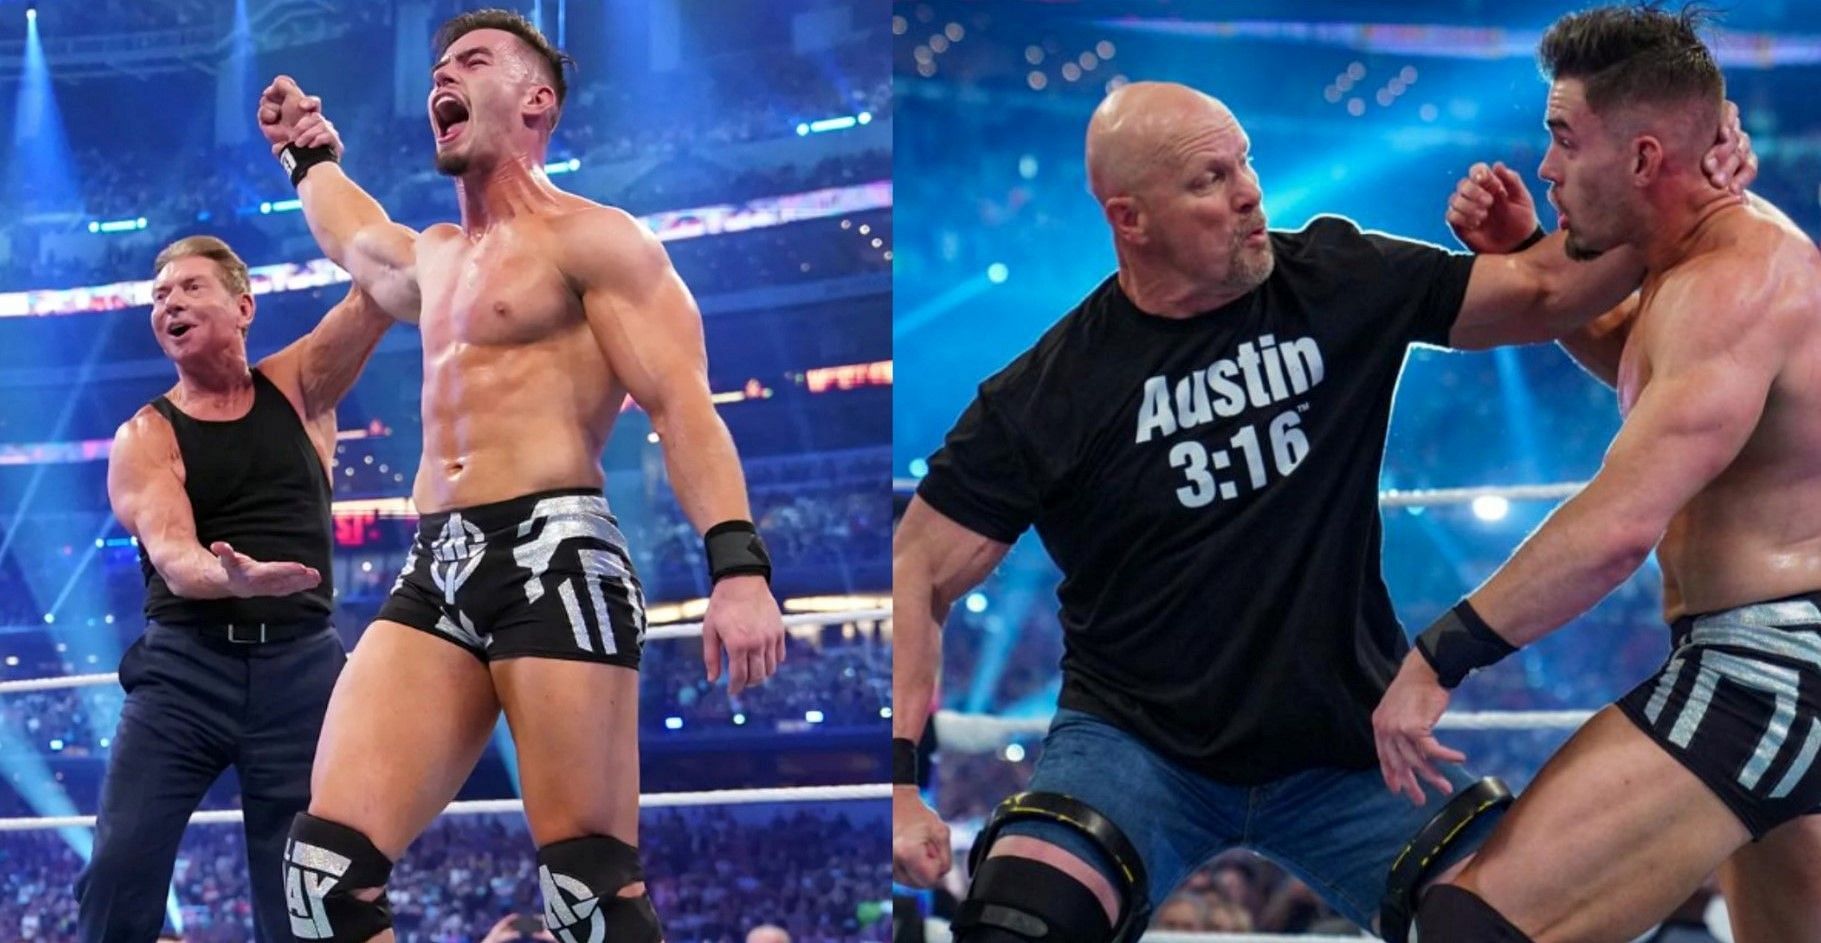 Pat McAfee defeated Theory at WrestleMania.